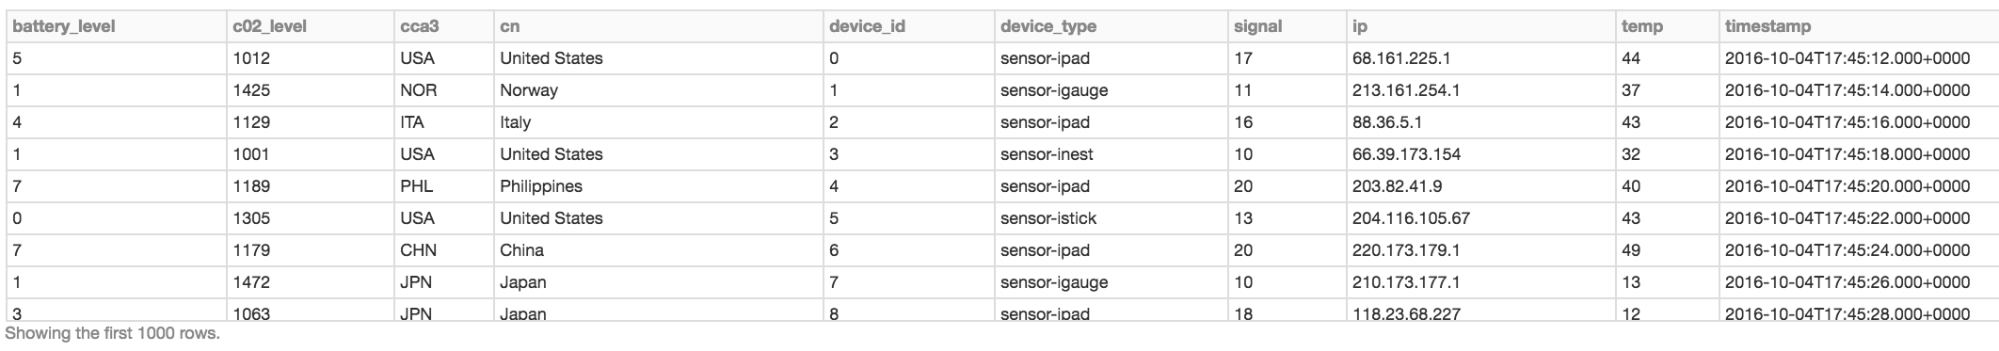 Display the Devices DataFrame as a table.